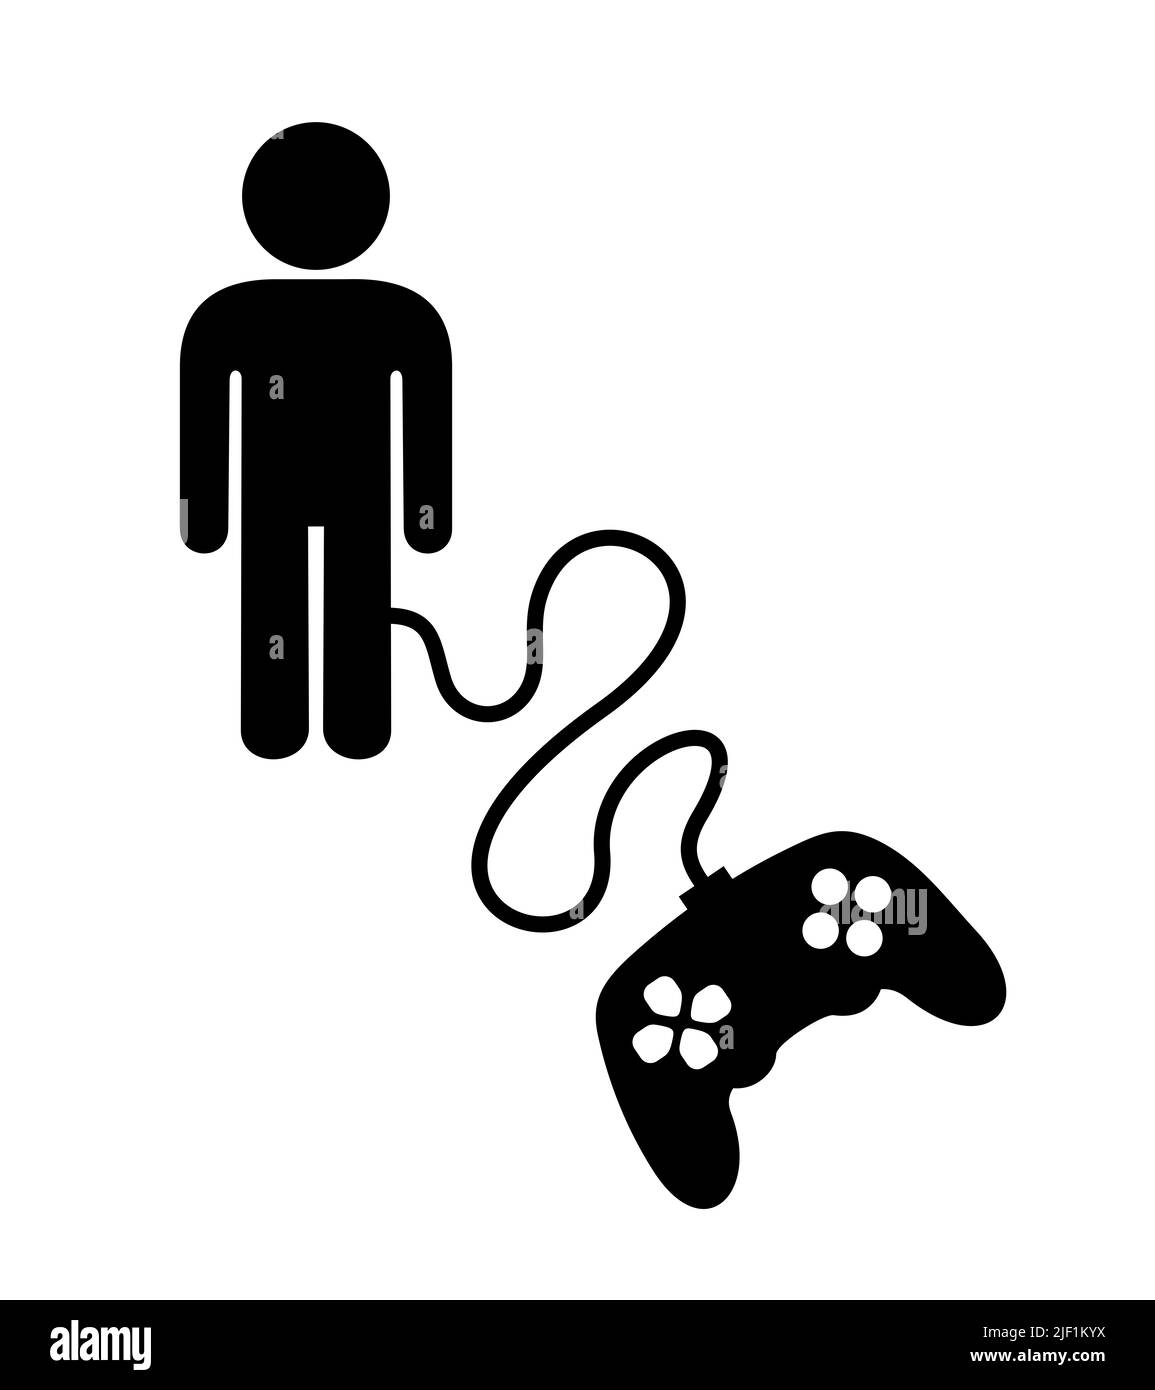 Man is manipulated and controlled by joystick and gamepad. Human as character of play, computer game and videogame. Vector illustration isolated on wh Stock Photo